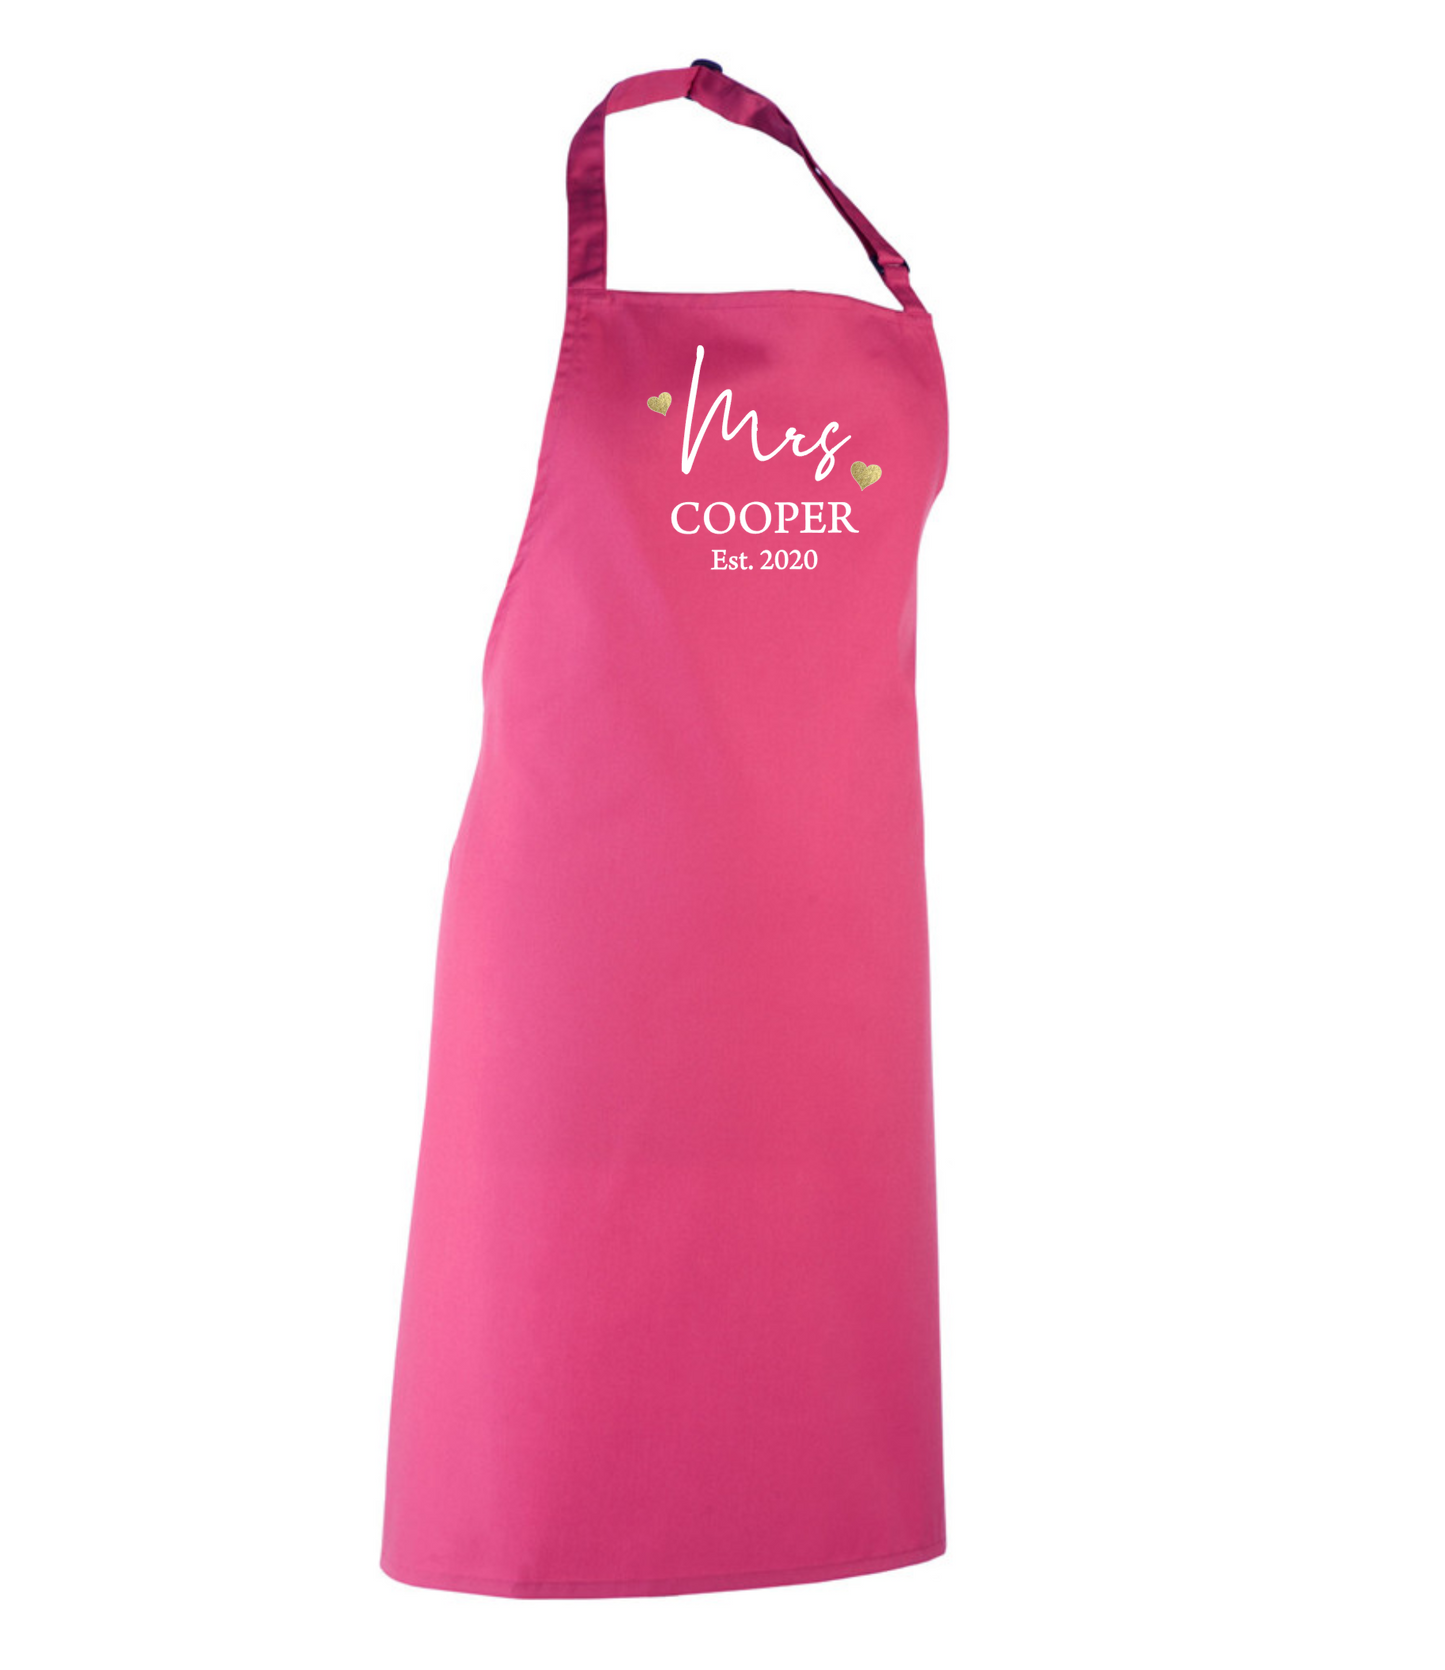 Set of 2 Aprons - Mr and Mrs